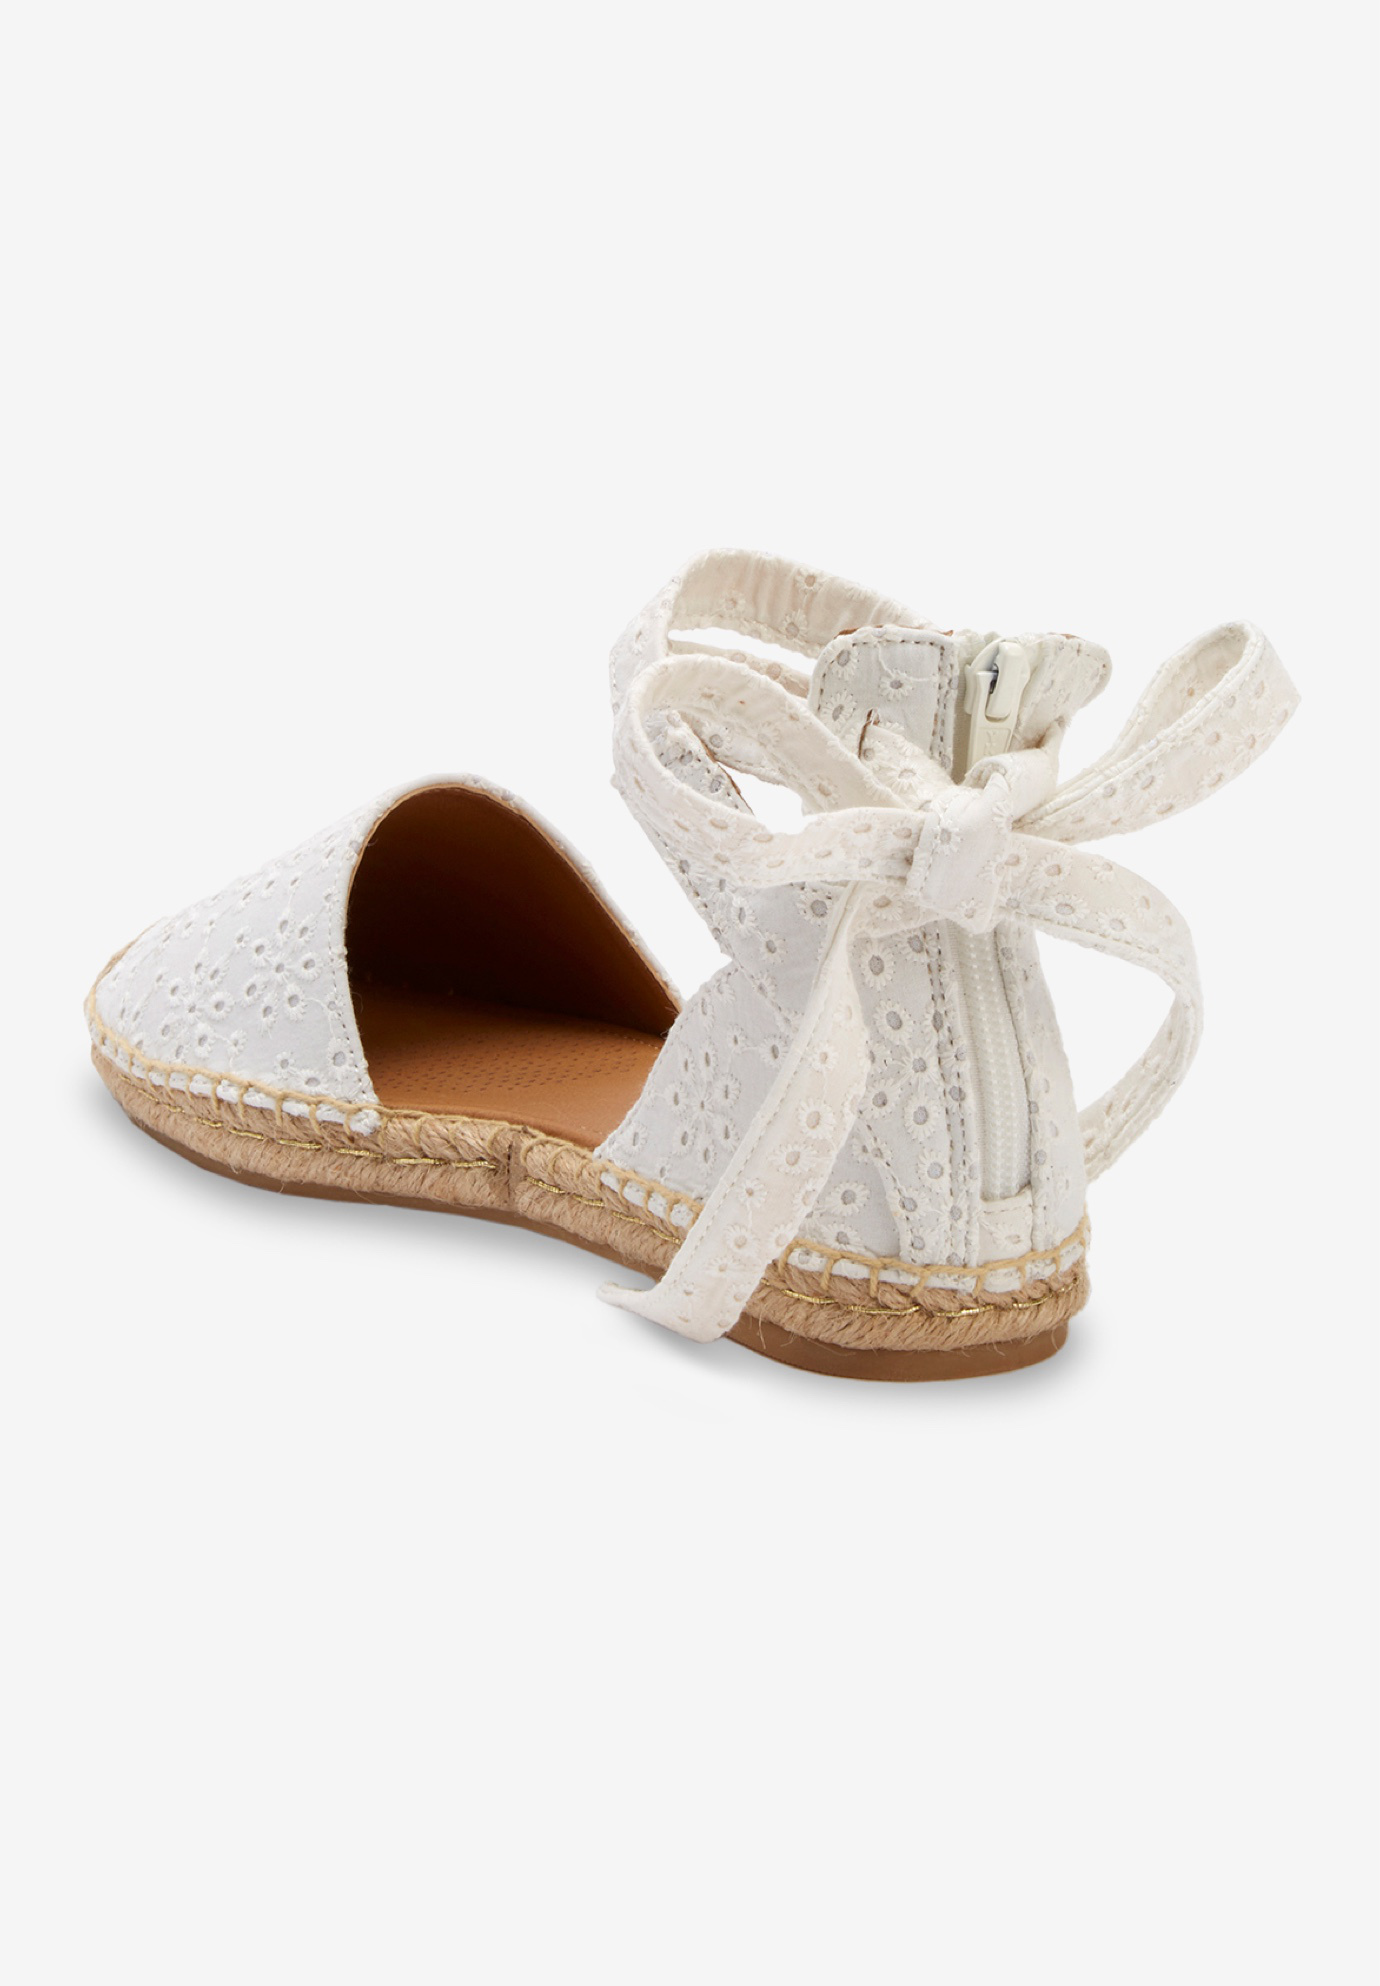 Comfortview Women's Wide Width The Shayla Flat Espadrille Shoes - image 3 of 7